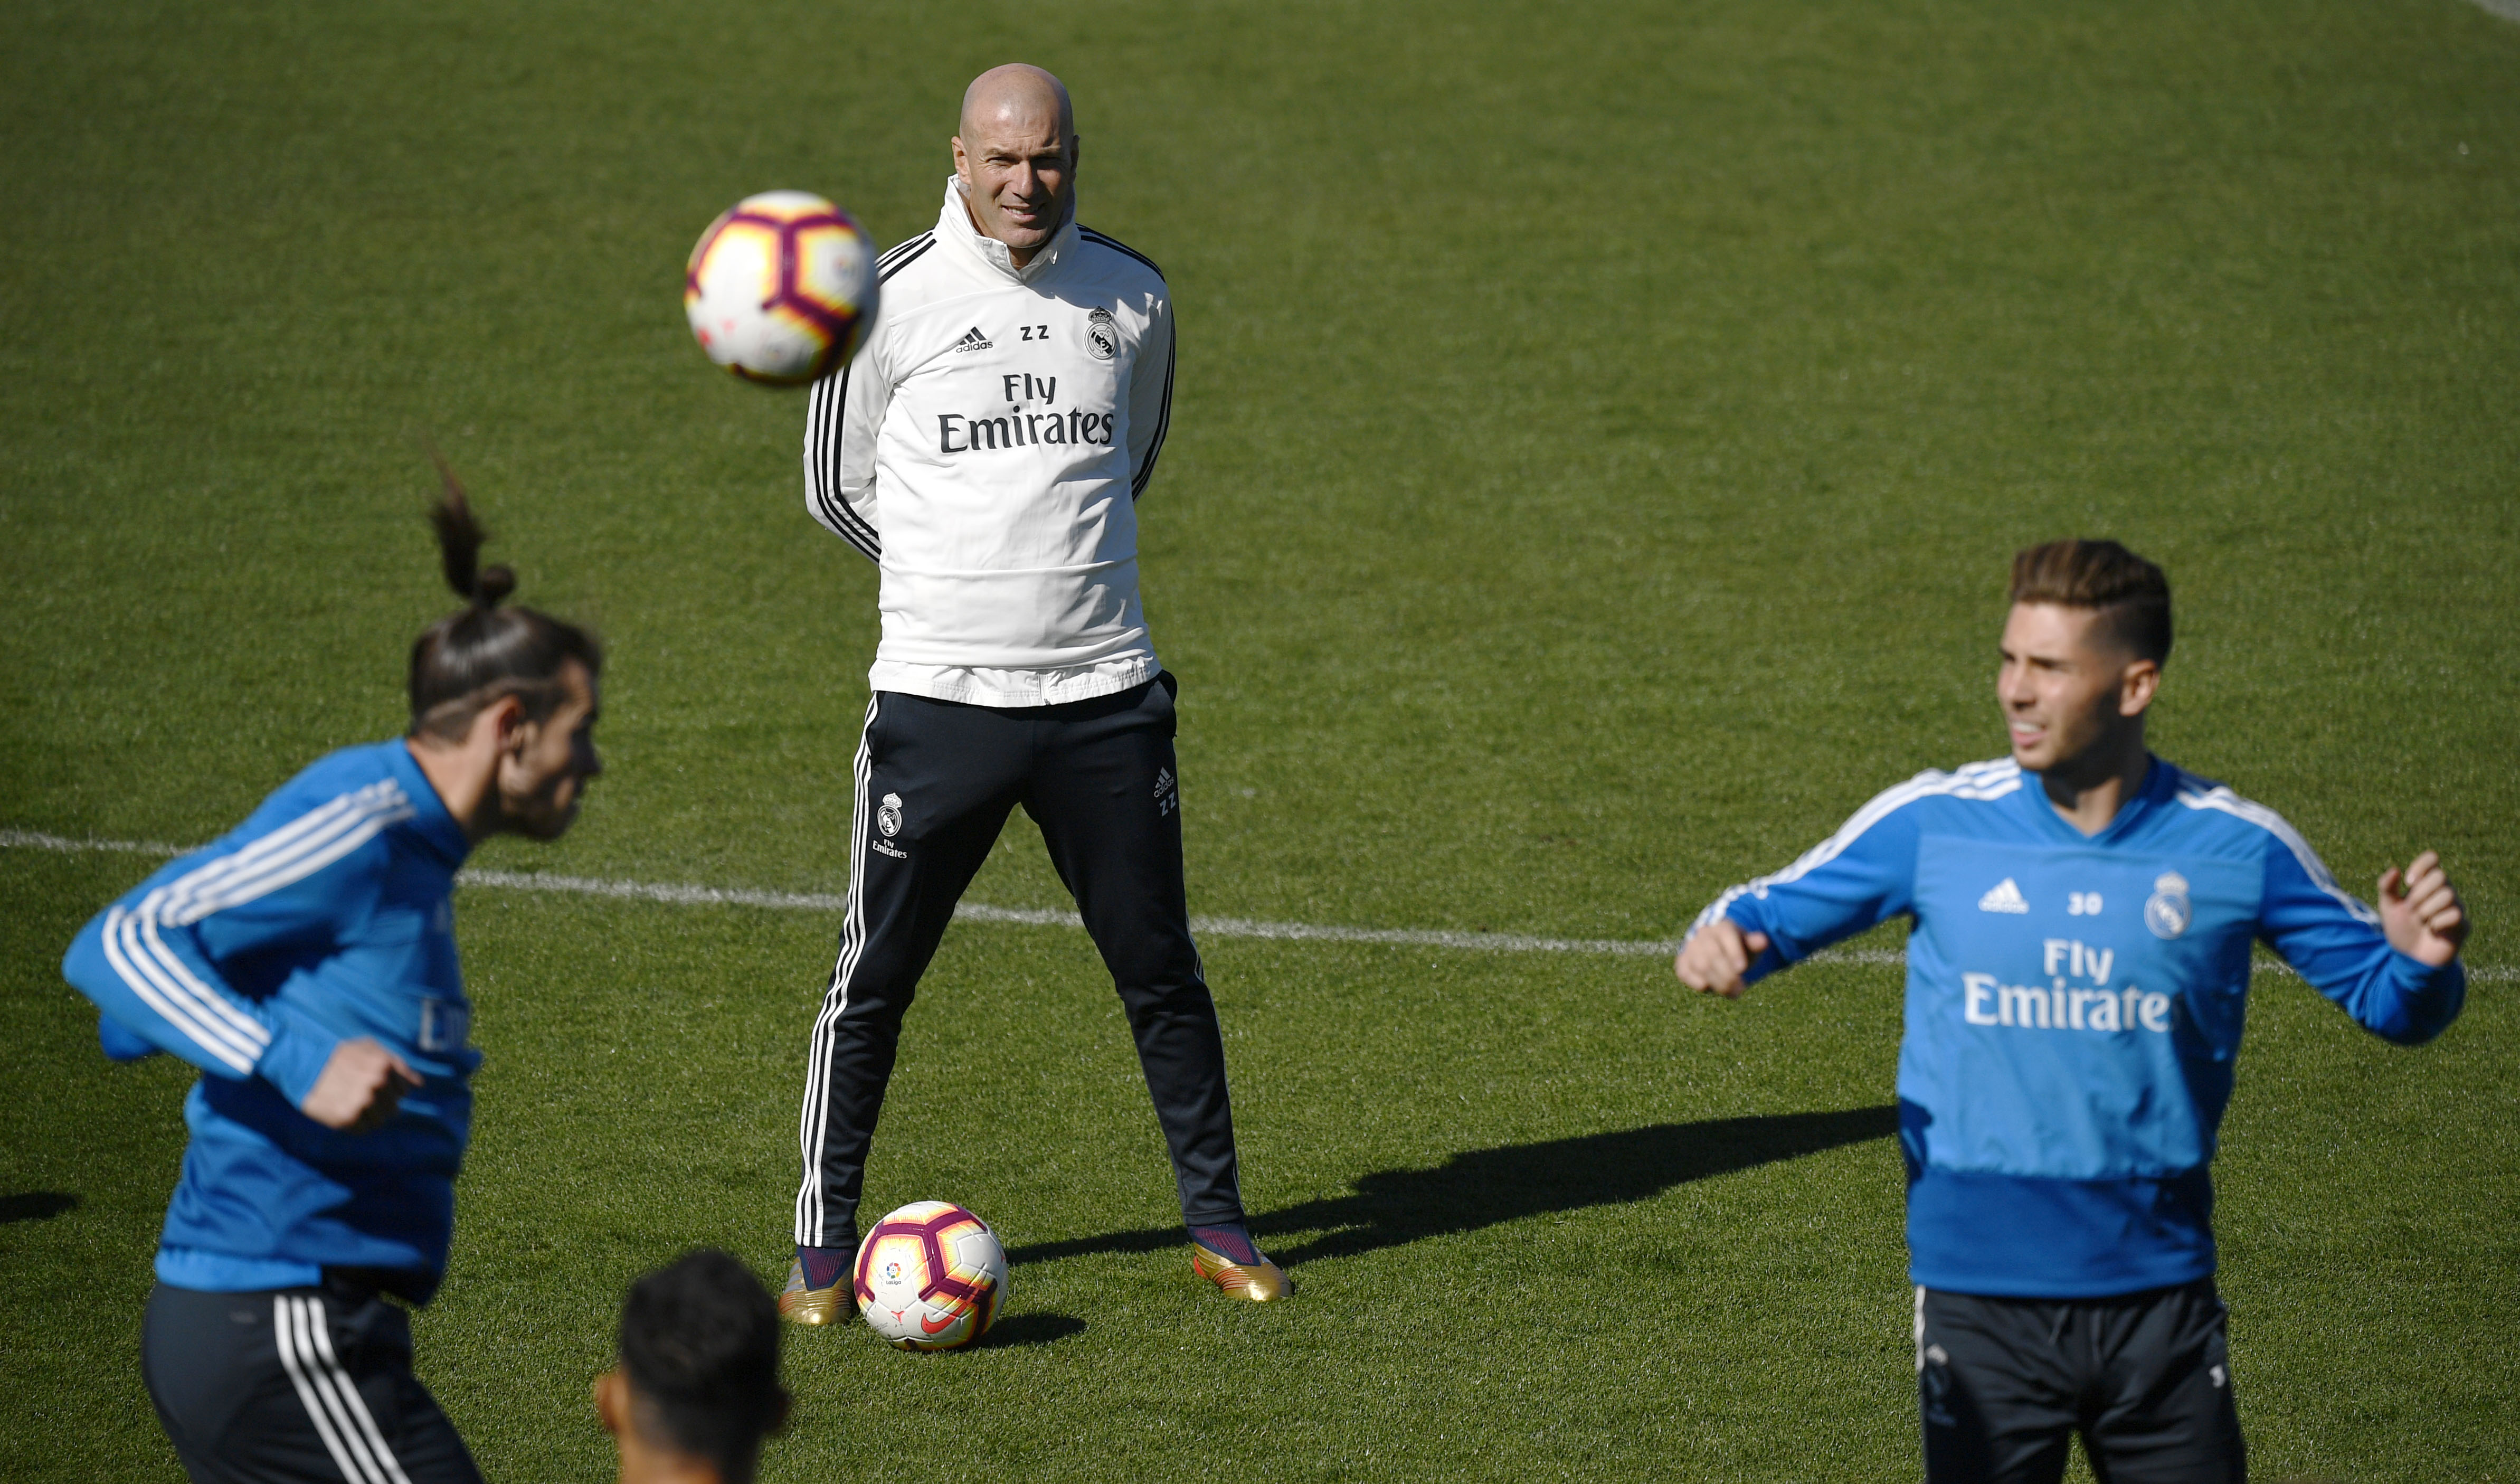 Real Madrid's French coach Zinedine Zidane (C) watches his son, Real Madrid's French goalkeeper Luca Zidane (R) and Real Madrid's Welsh forward Gareth Bale during a training session at the Valdebebas training facilities in Madrid on March 15, 2019. (Photo by GABRIEL BOUYS / AFP)        (Photo credit should read GABRIEL BOUYS/AFP/Getty Images)